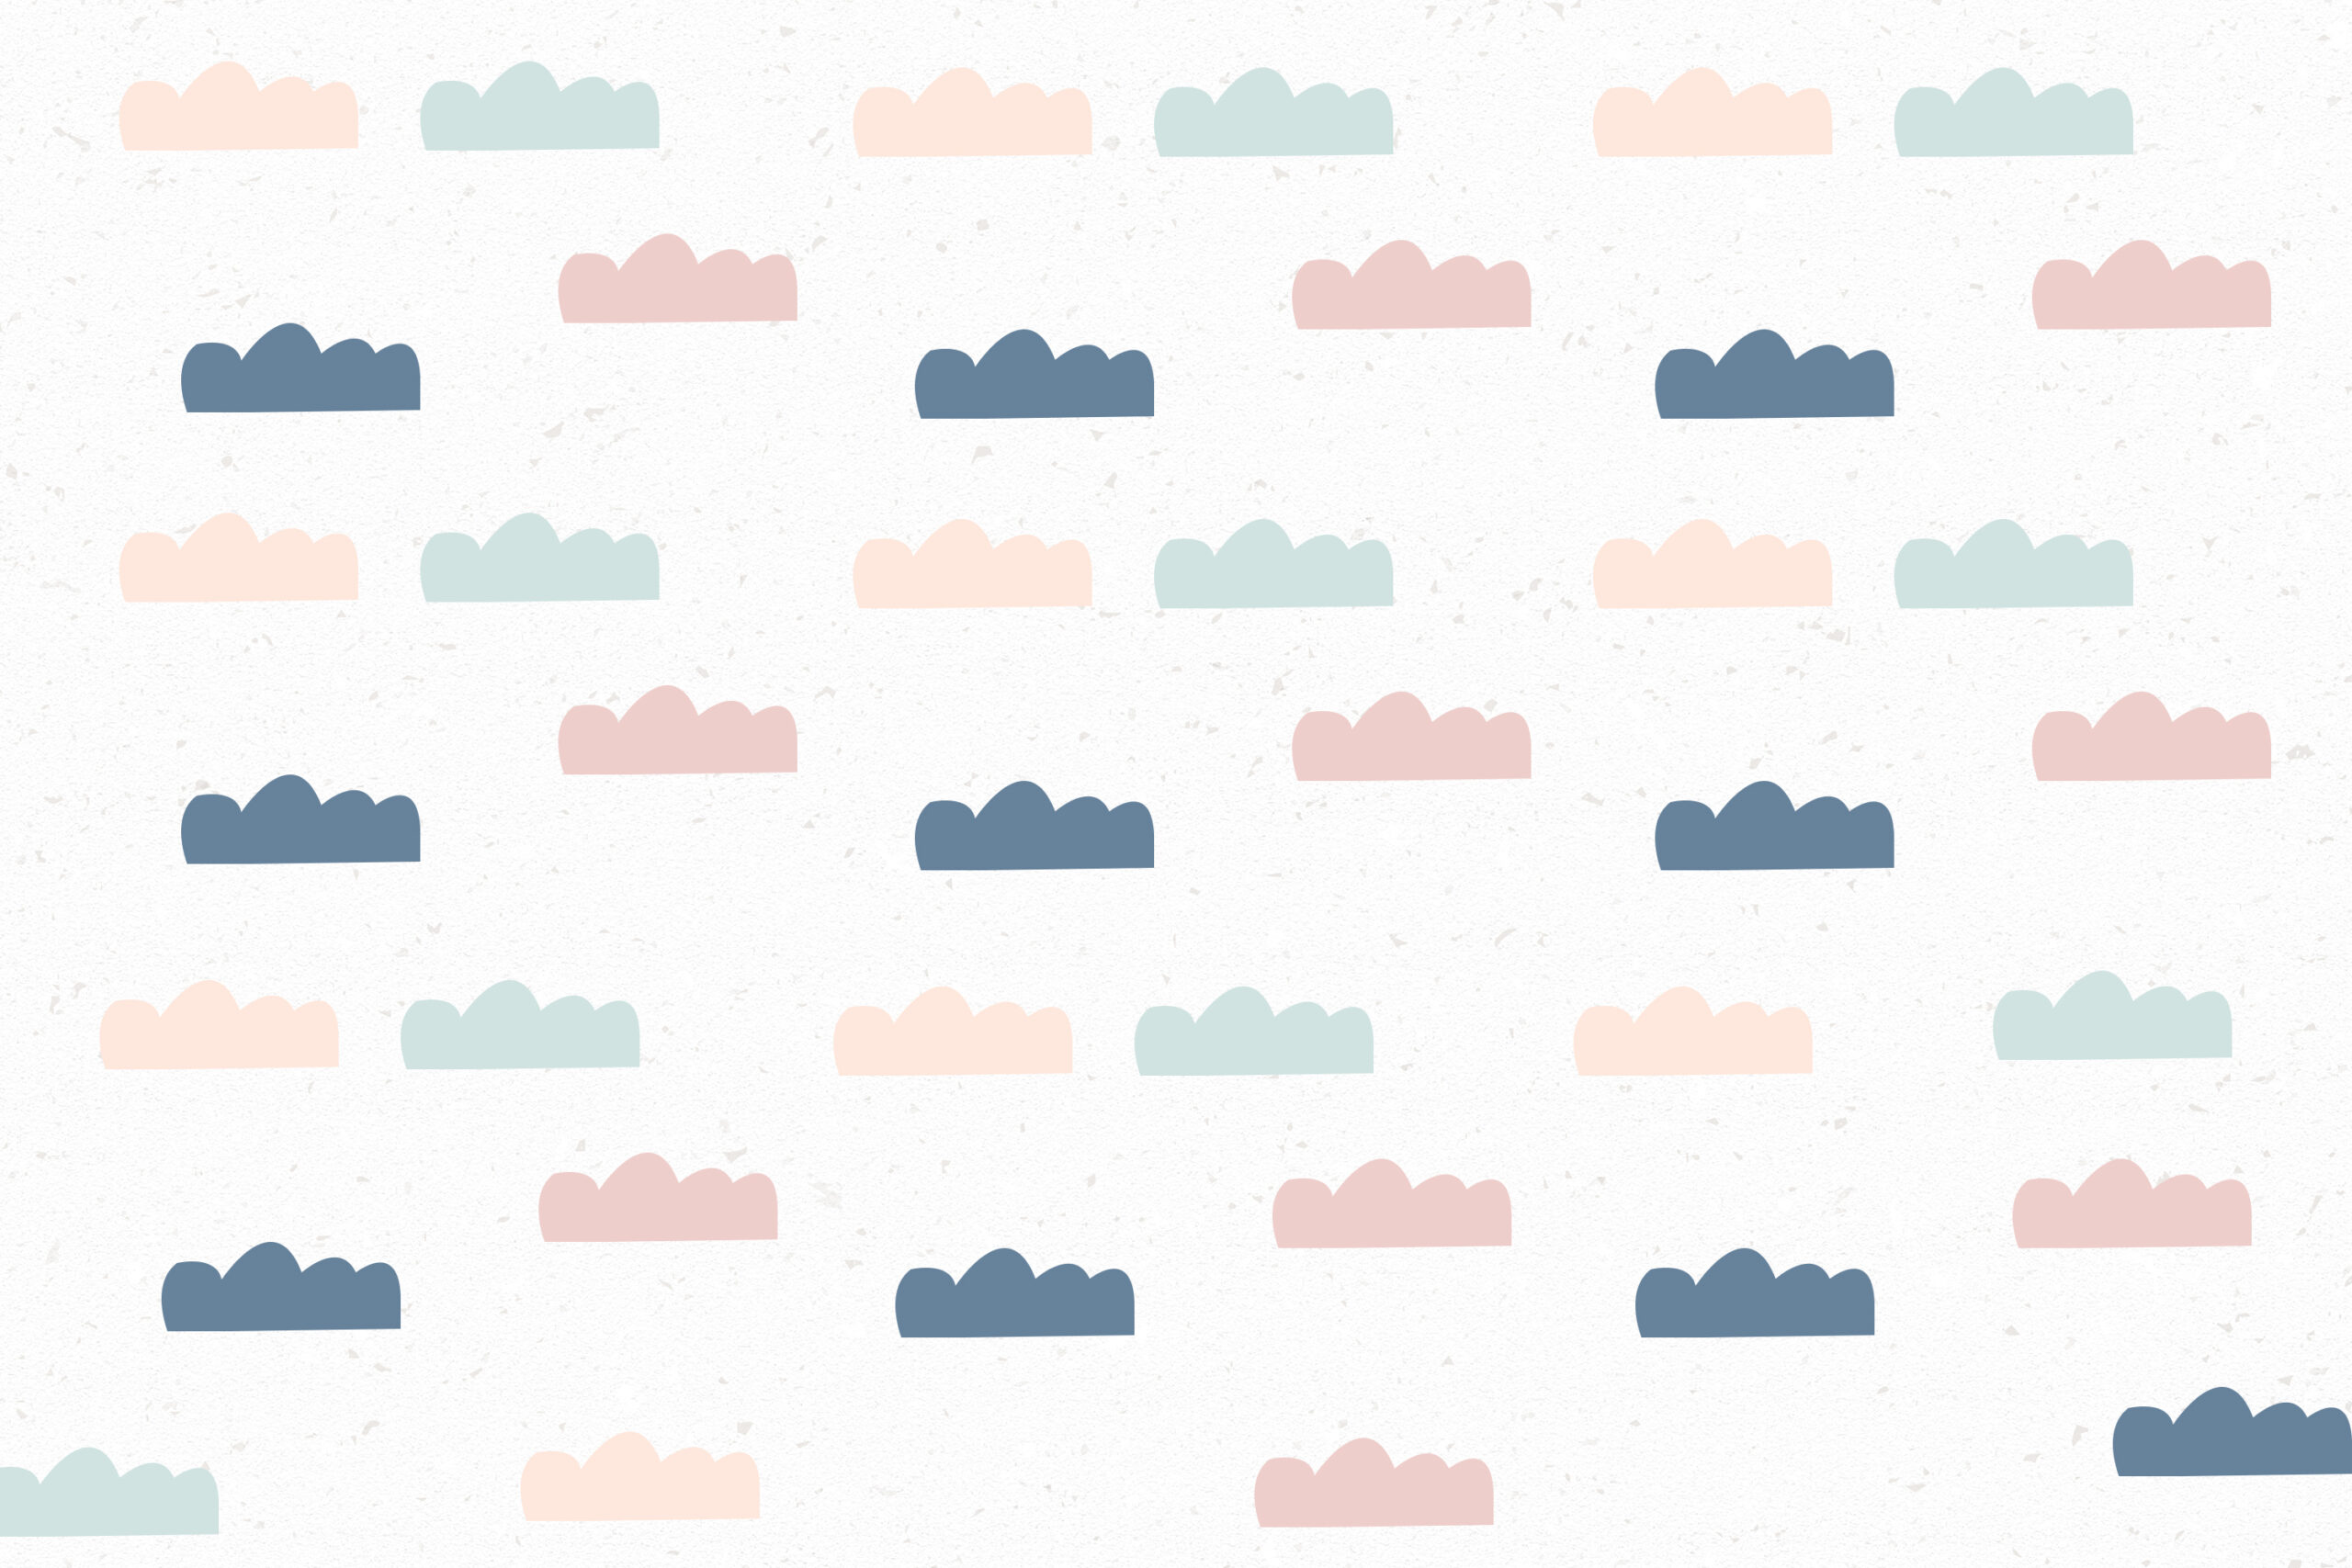 Vibrant Clouds Aesthetic Patterns